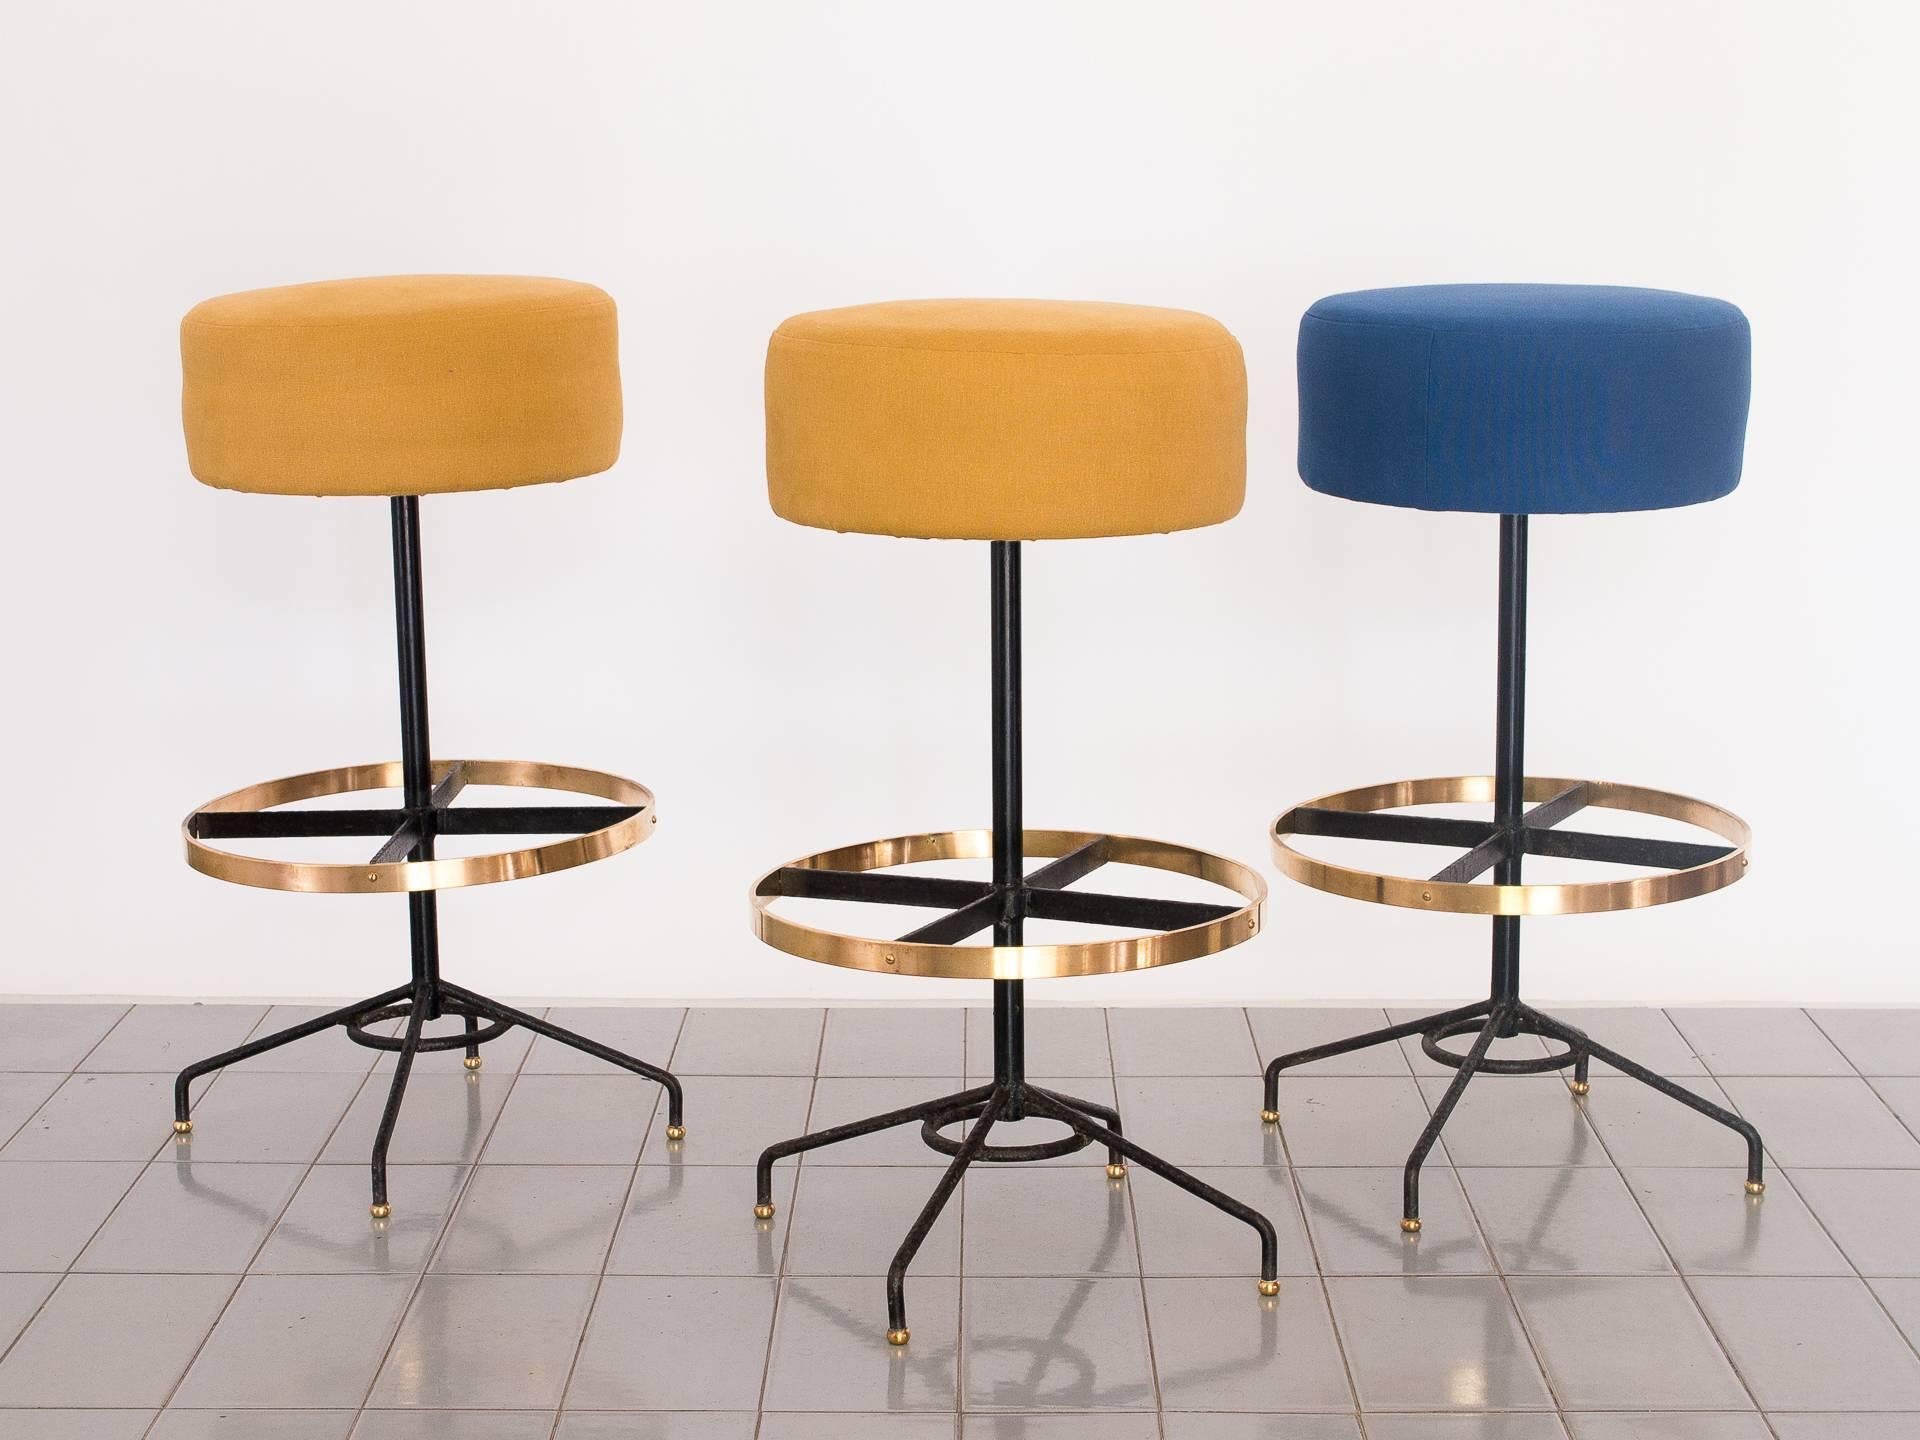 1950's set of three bar stools in iron and brass designed by Borsoi. Beautiful high cushions makes them extremely comfortable and the brass ring seals the deal on the looks department. Unique.

In 2017, we discovered a collection of Mid-Century